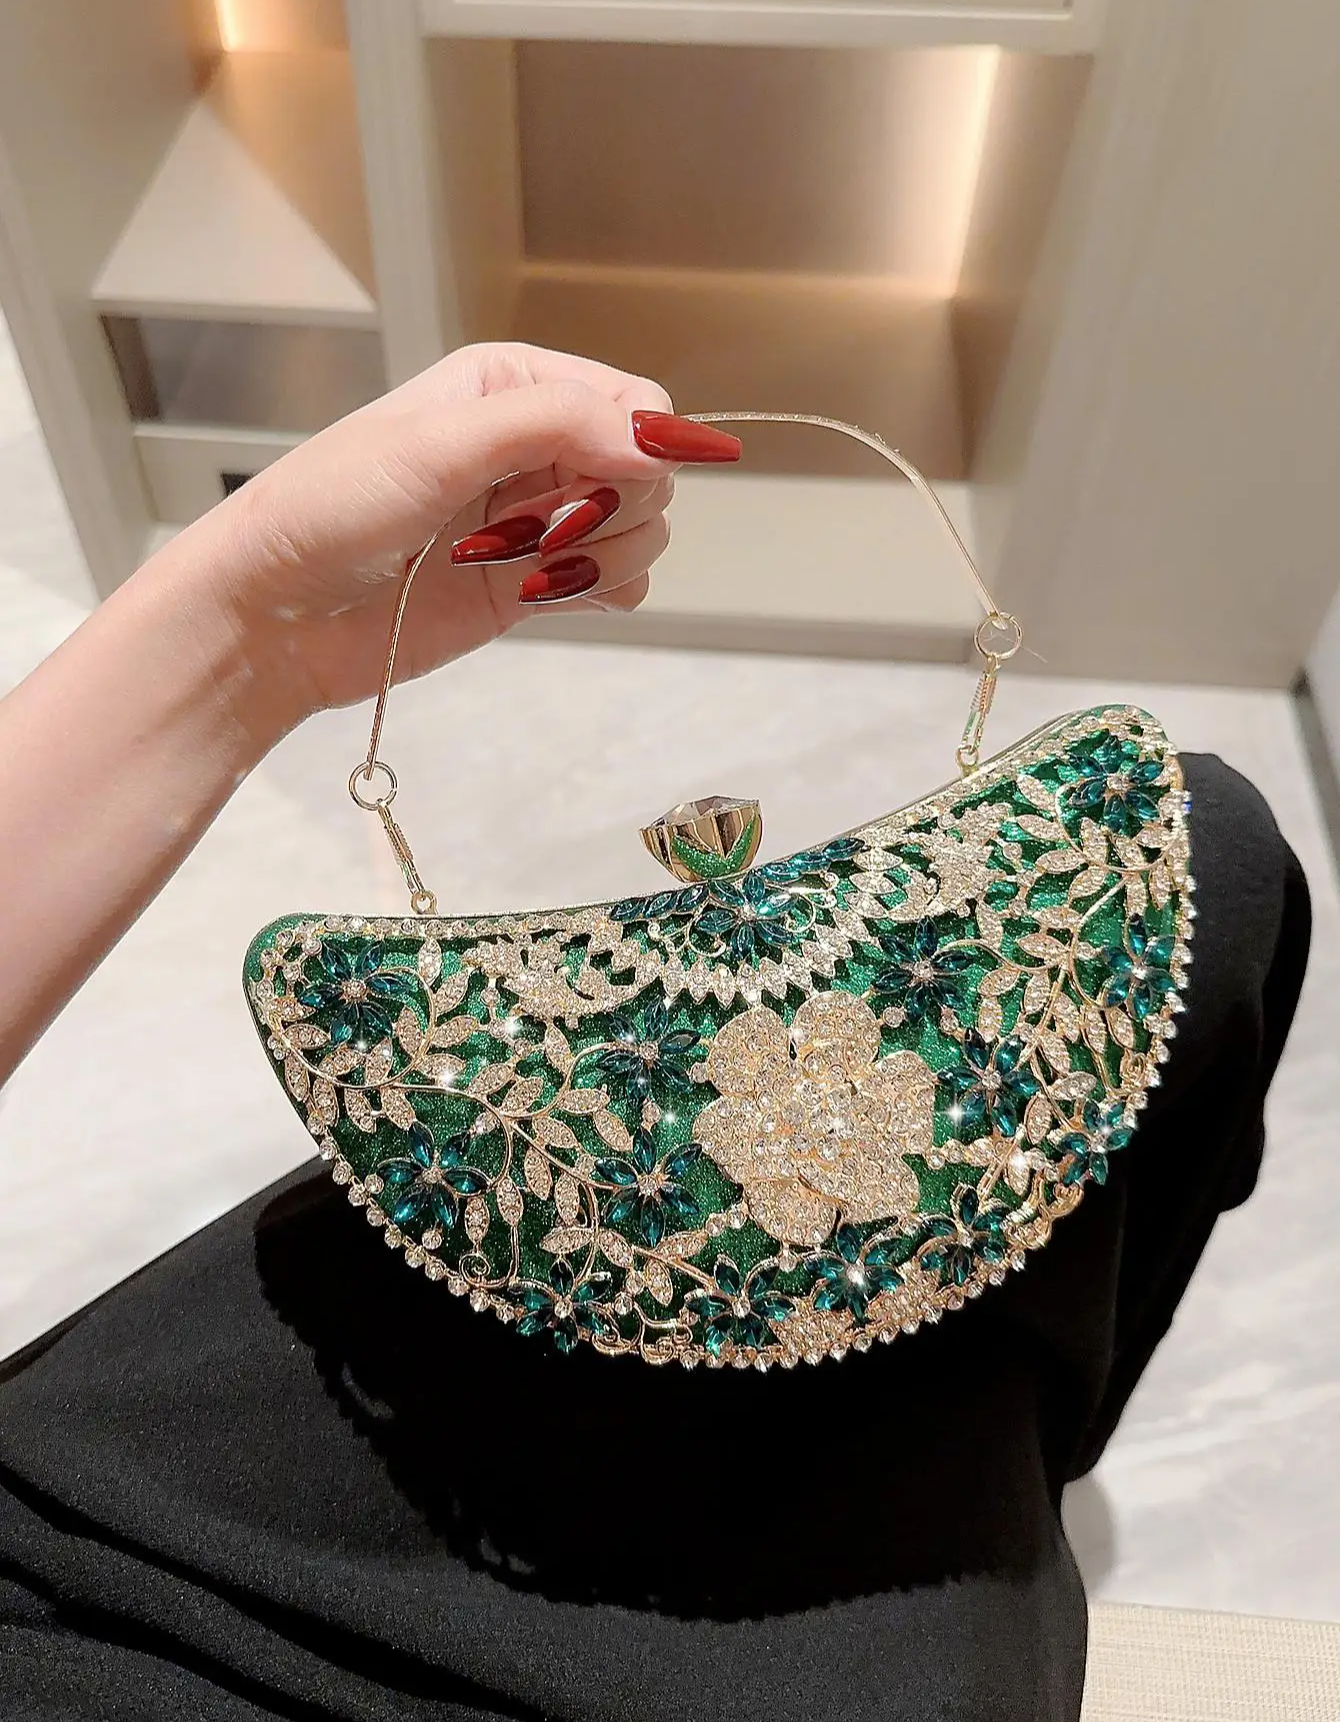 Women's Luxurious Evening Clutch with Crystal Flower: Perfect for Wedding, Parties, and Dinner